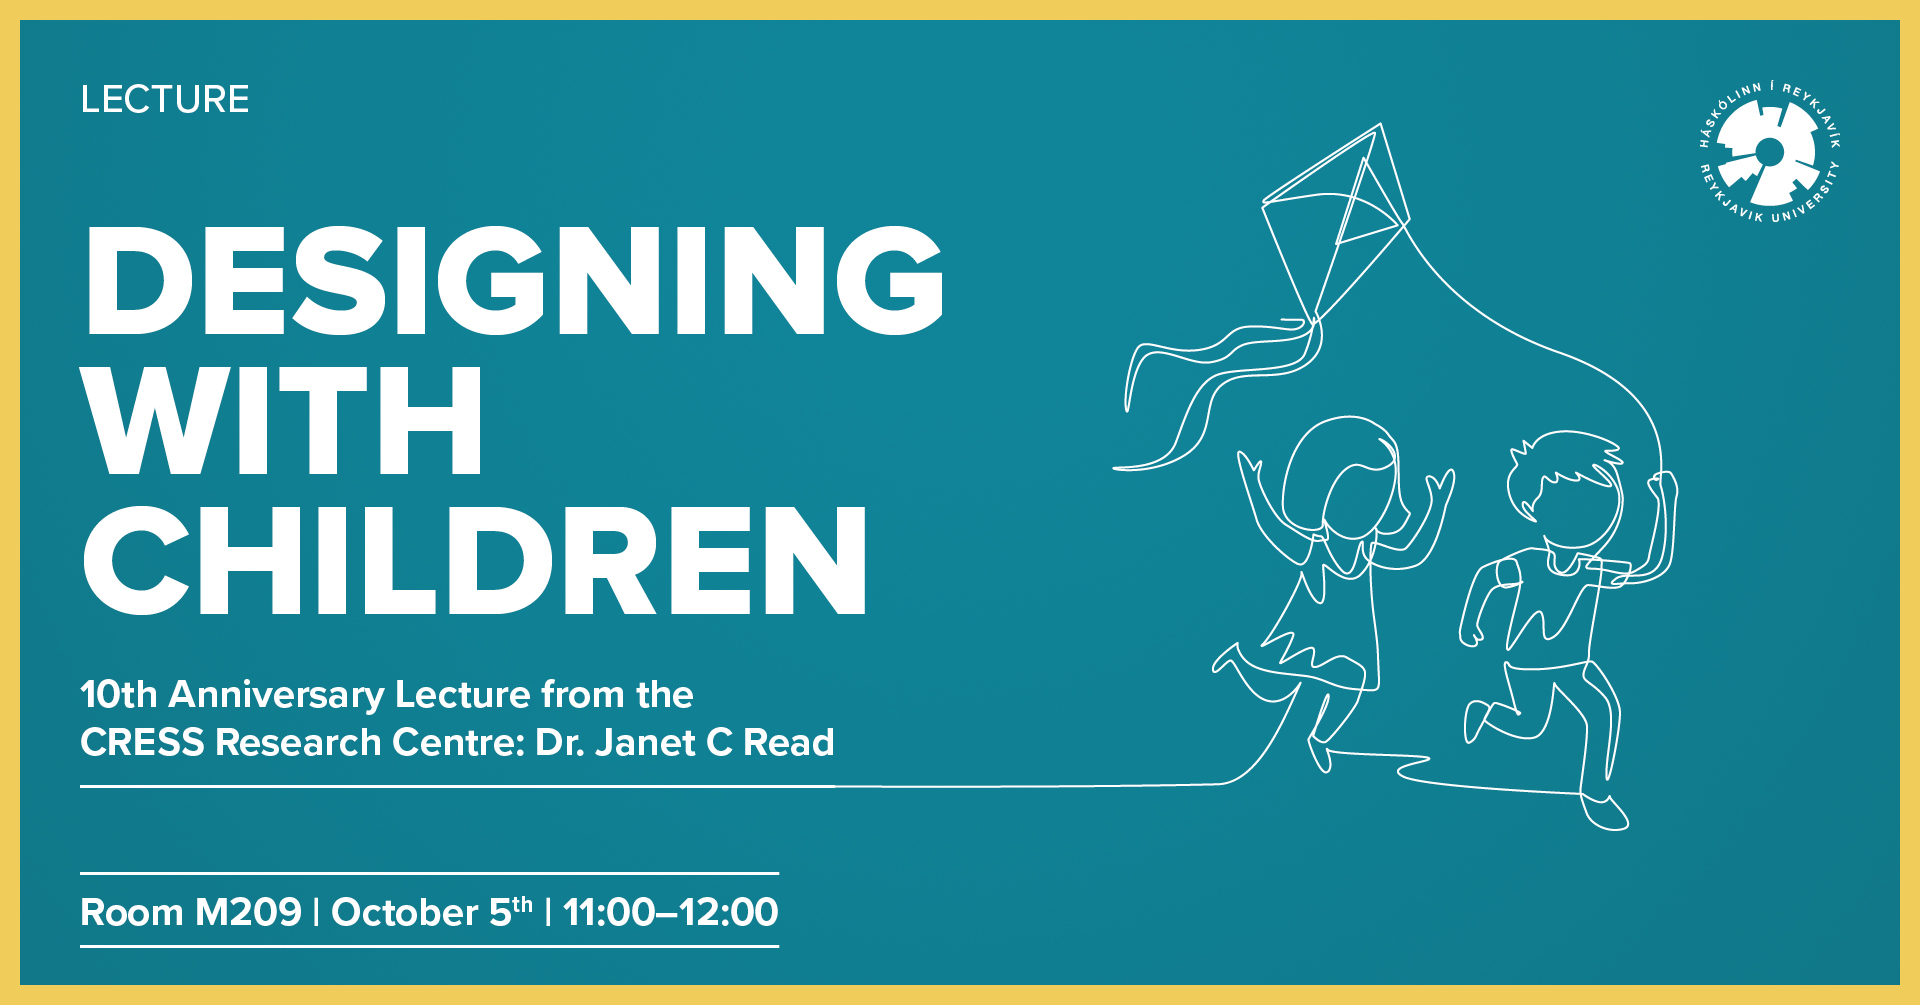 10th Anniversary Lecture: Dr. Janet C. Read